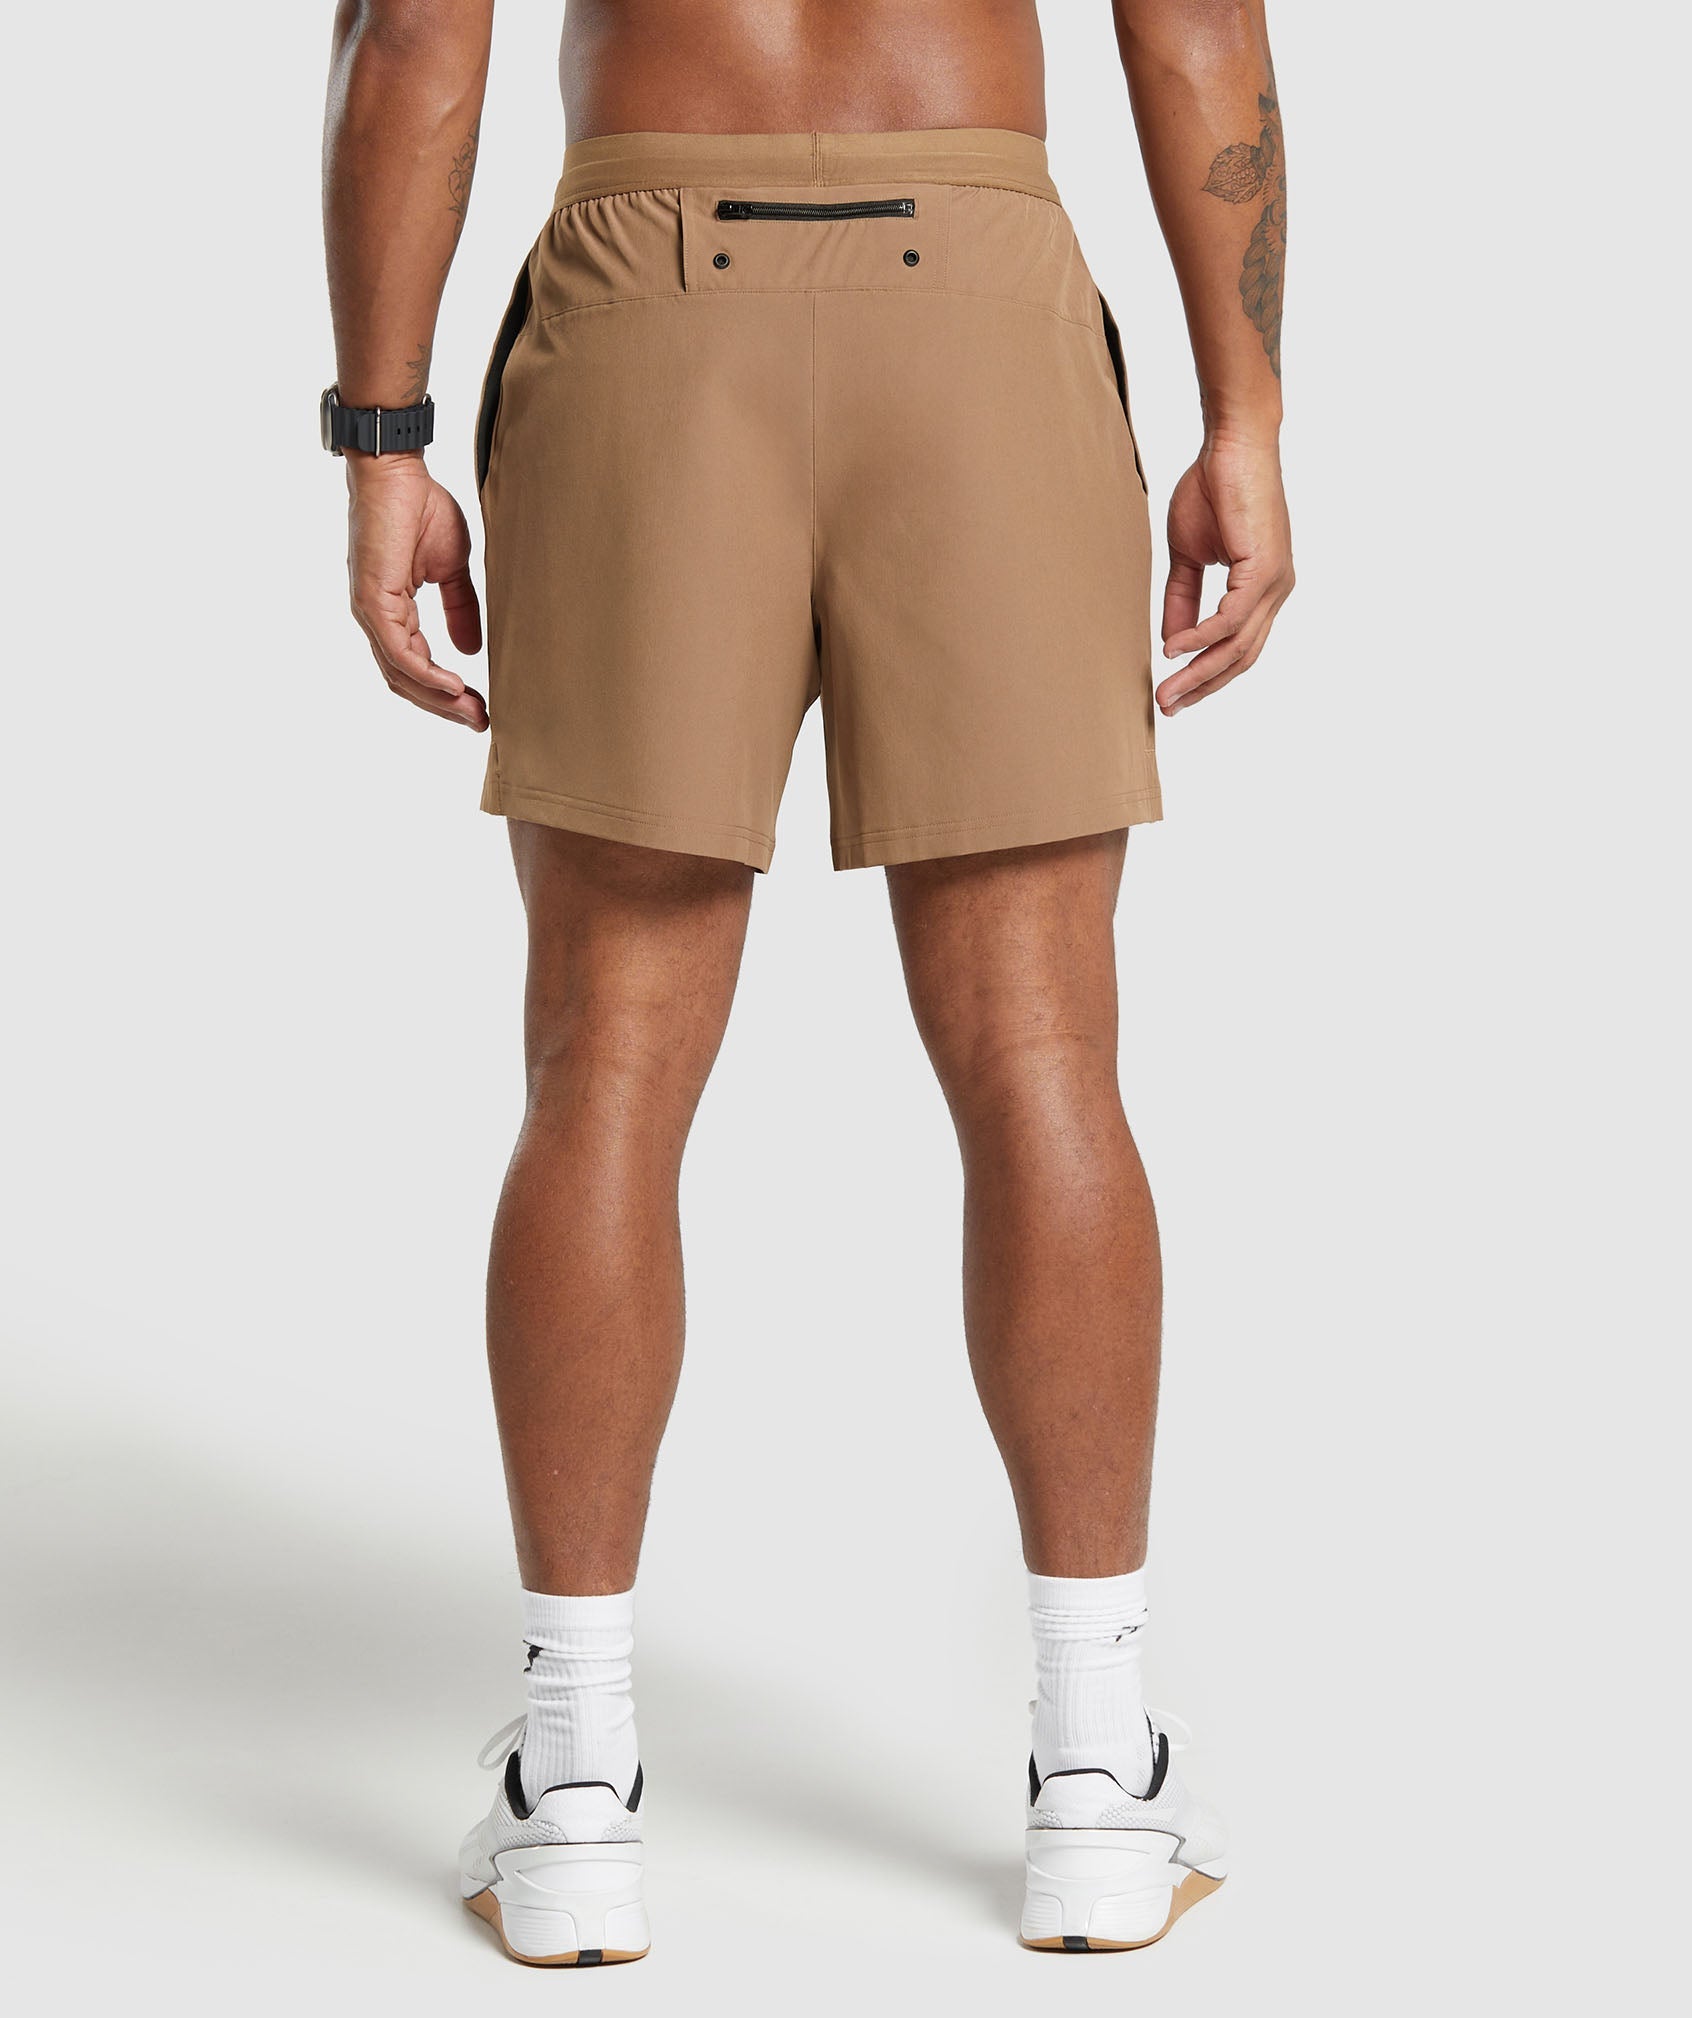 Land to Water 6" Shorts in Caramel Brown - view 2